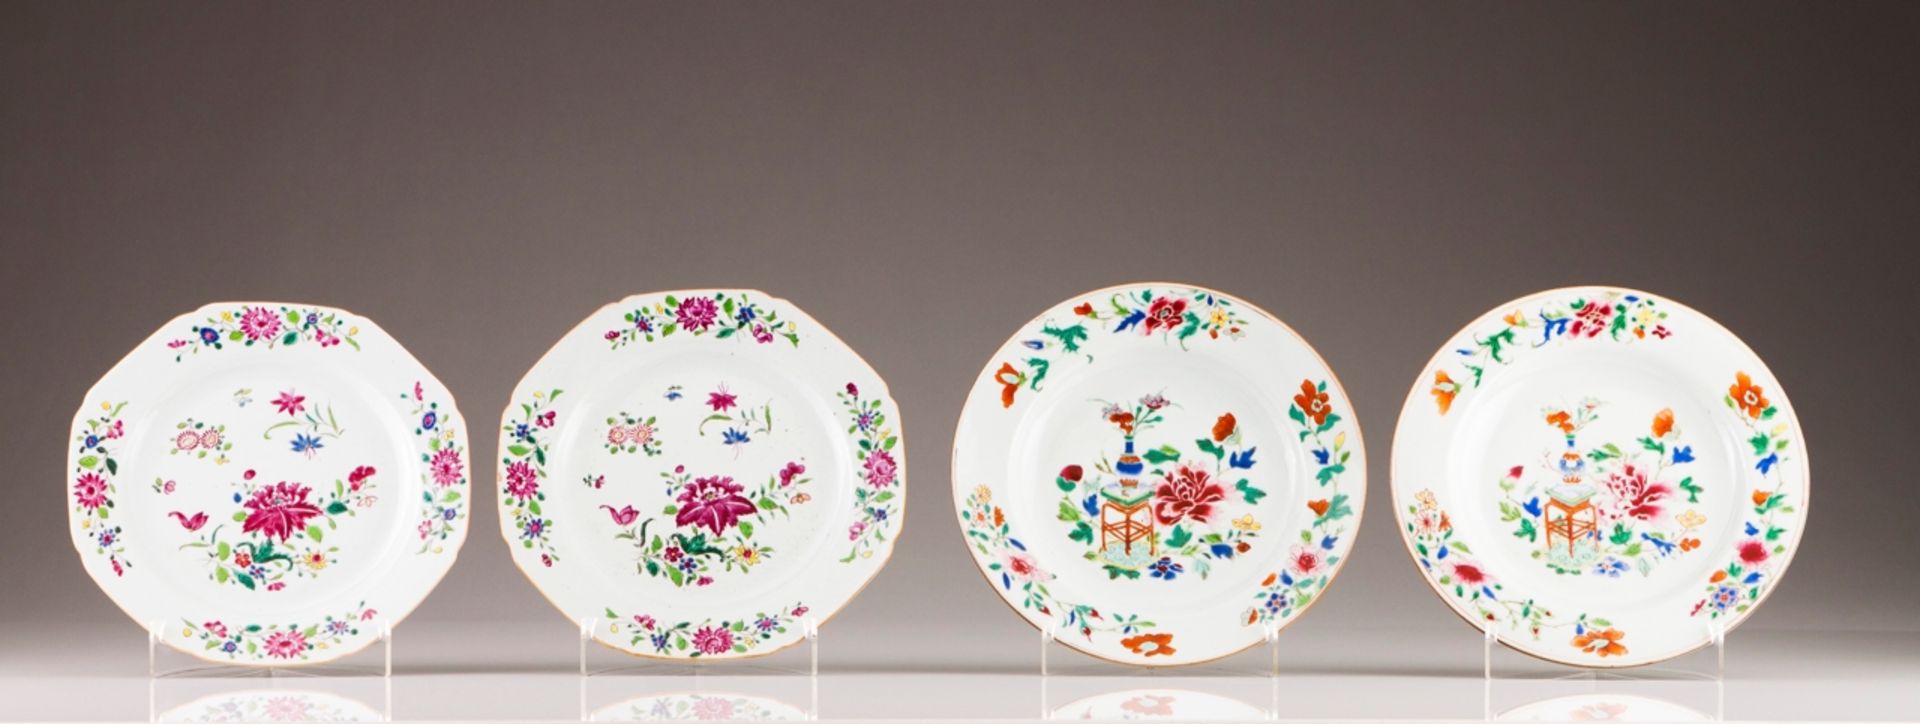 A pair of Qianlong octagonal plates
Chinese export porcelain
Polychrome decoration with flowers